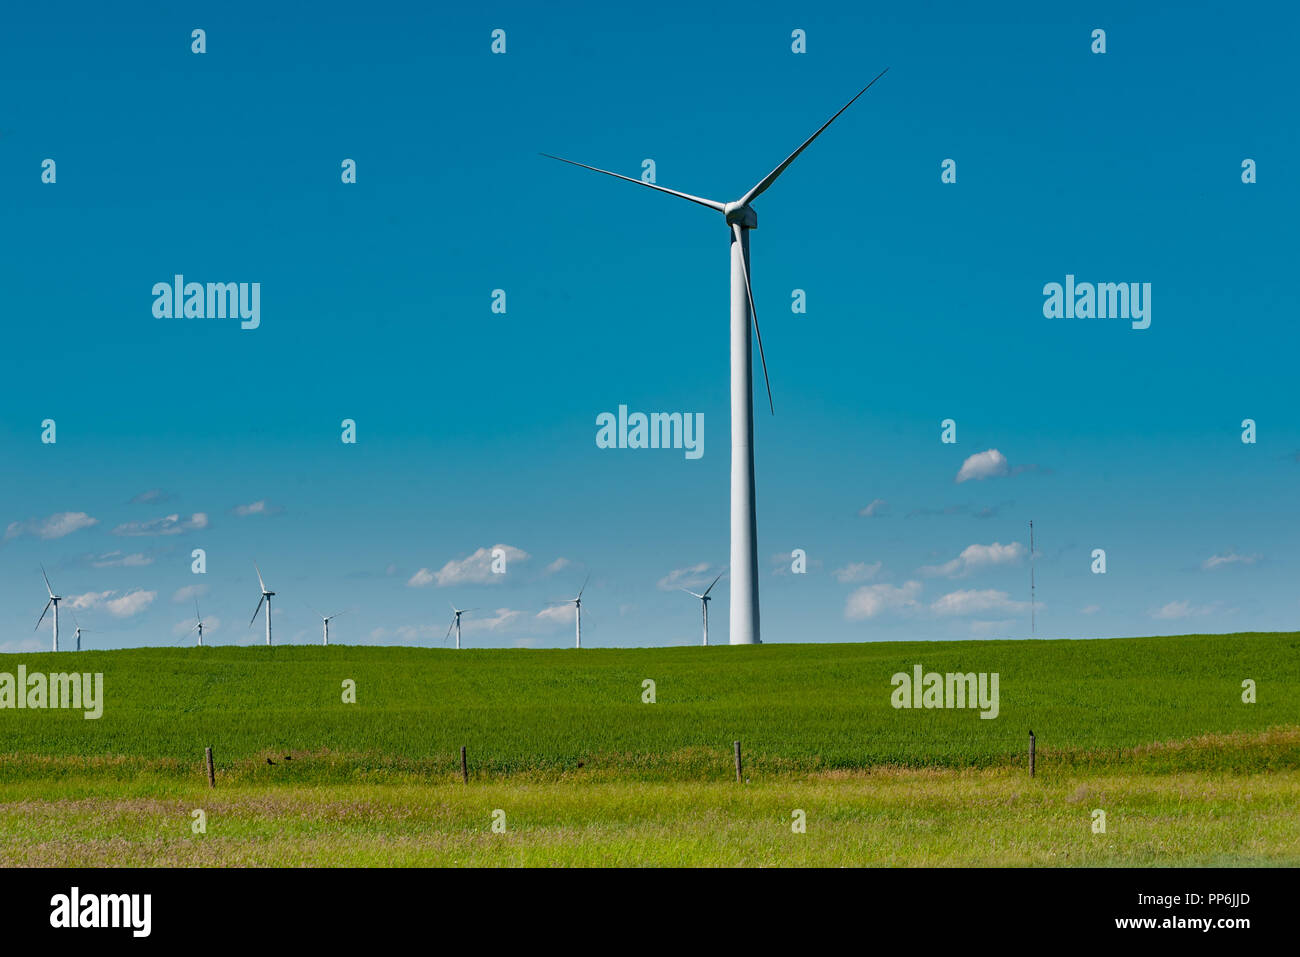 Power generating windfarm in the prairies of Southern Alberta Canada Stock Photo